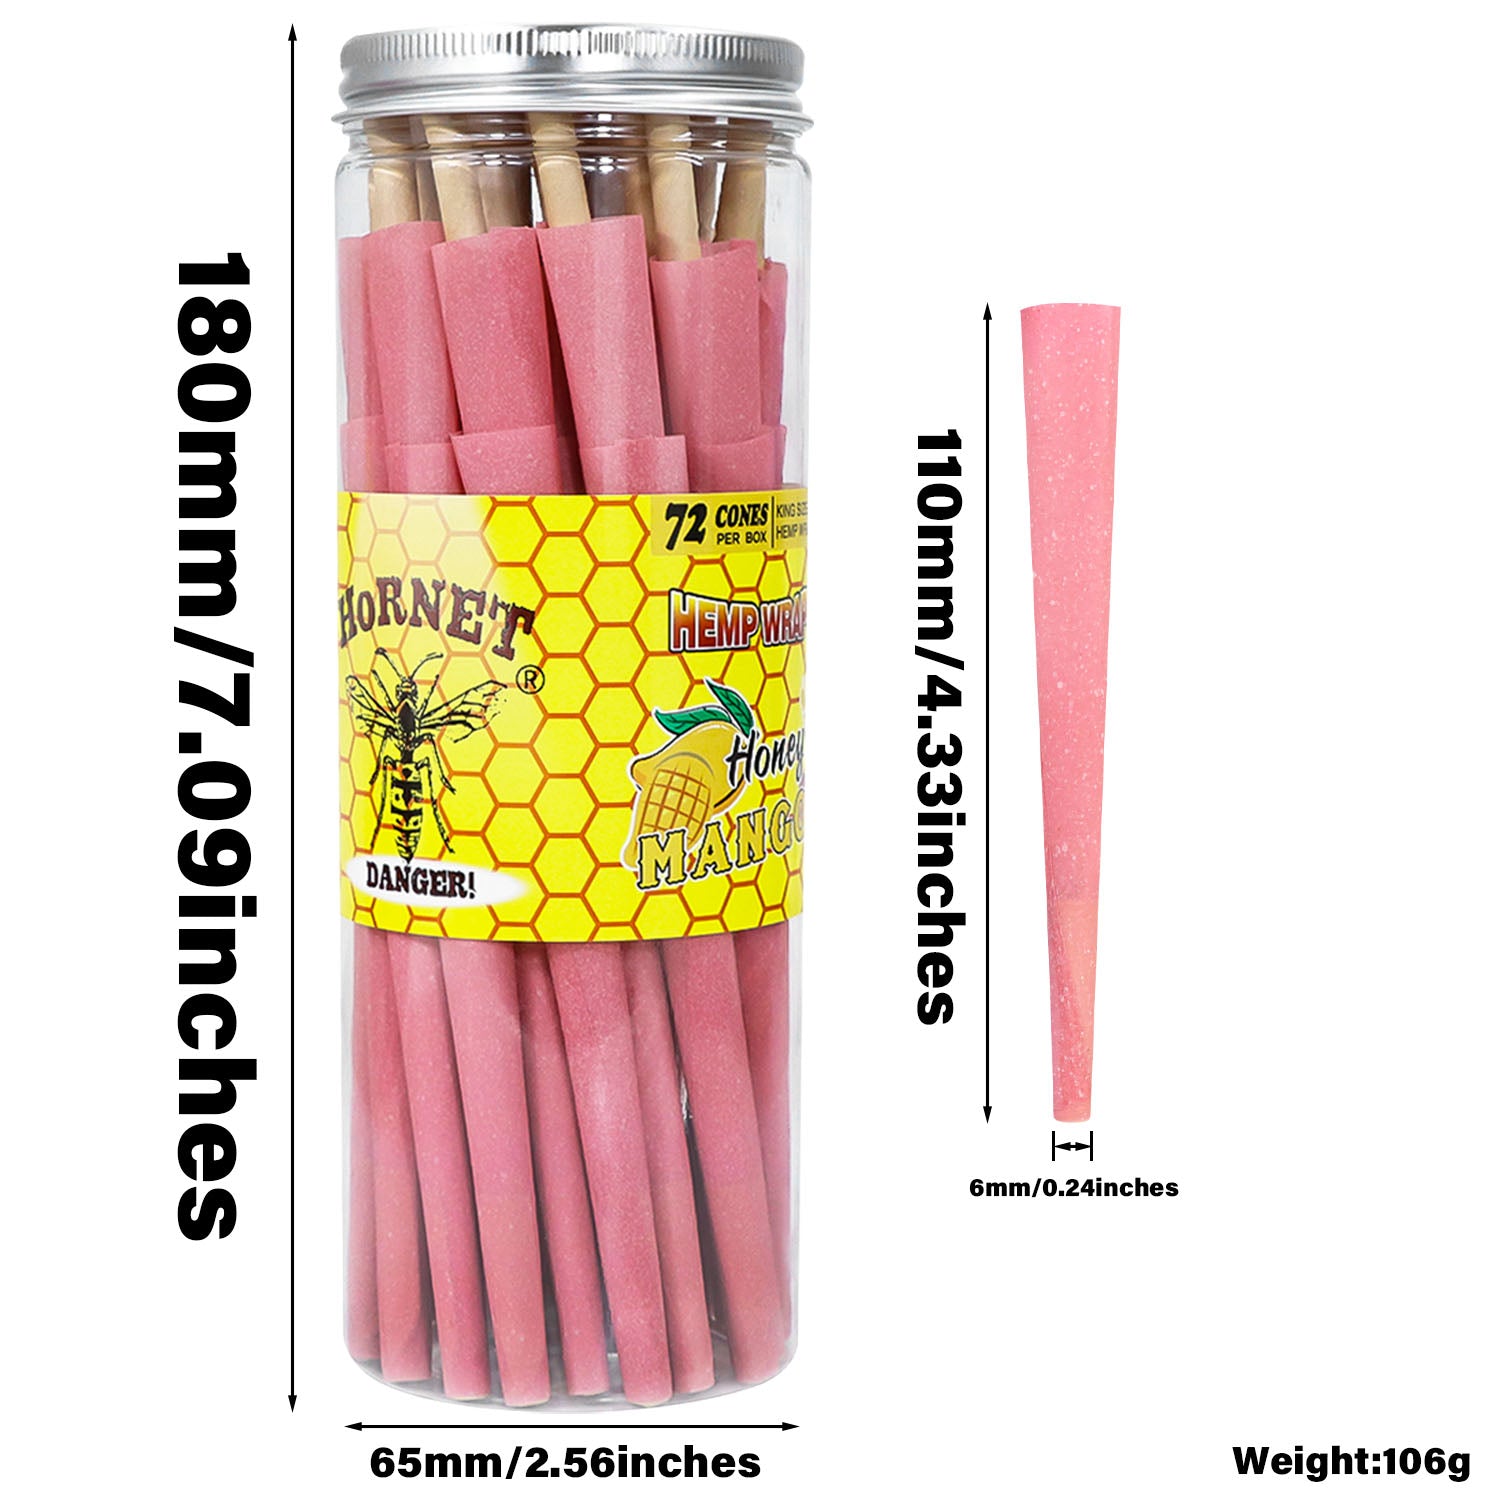 HORNET MANGO Flavored Pink Pre Rolled Cones, King Size Pre Rolled Rolling Paper with tips, Slow Burning Rolling Cones & load, 72 PCS / Jar